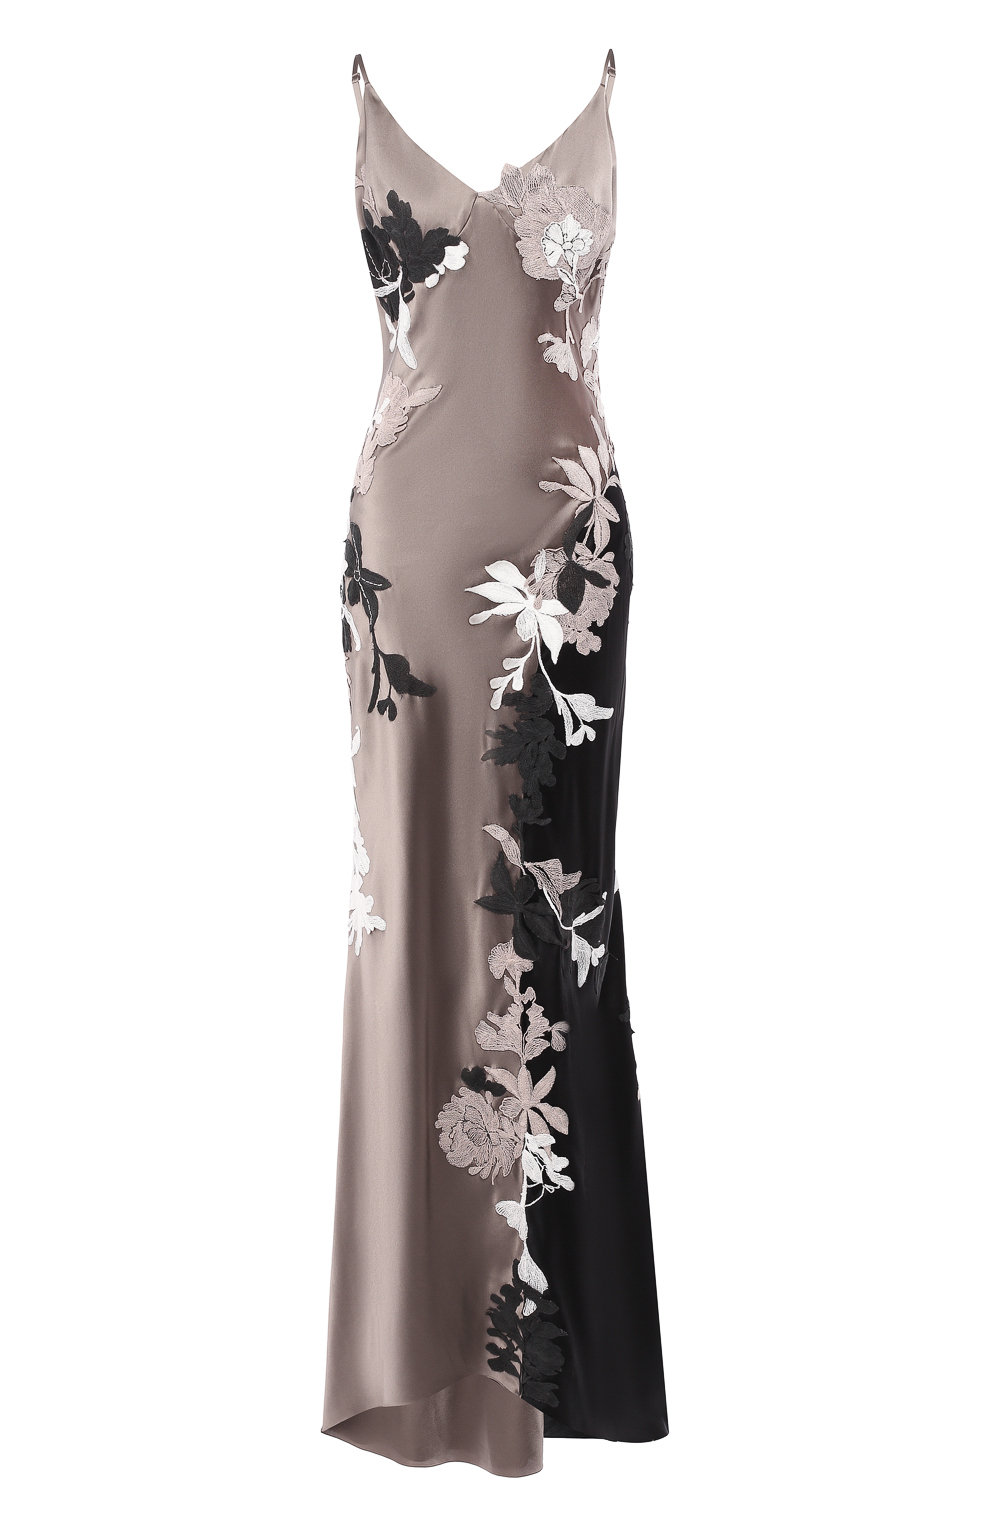 Silk slip dress decorated with flower appliques